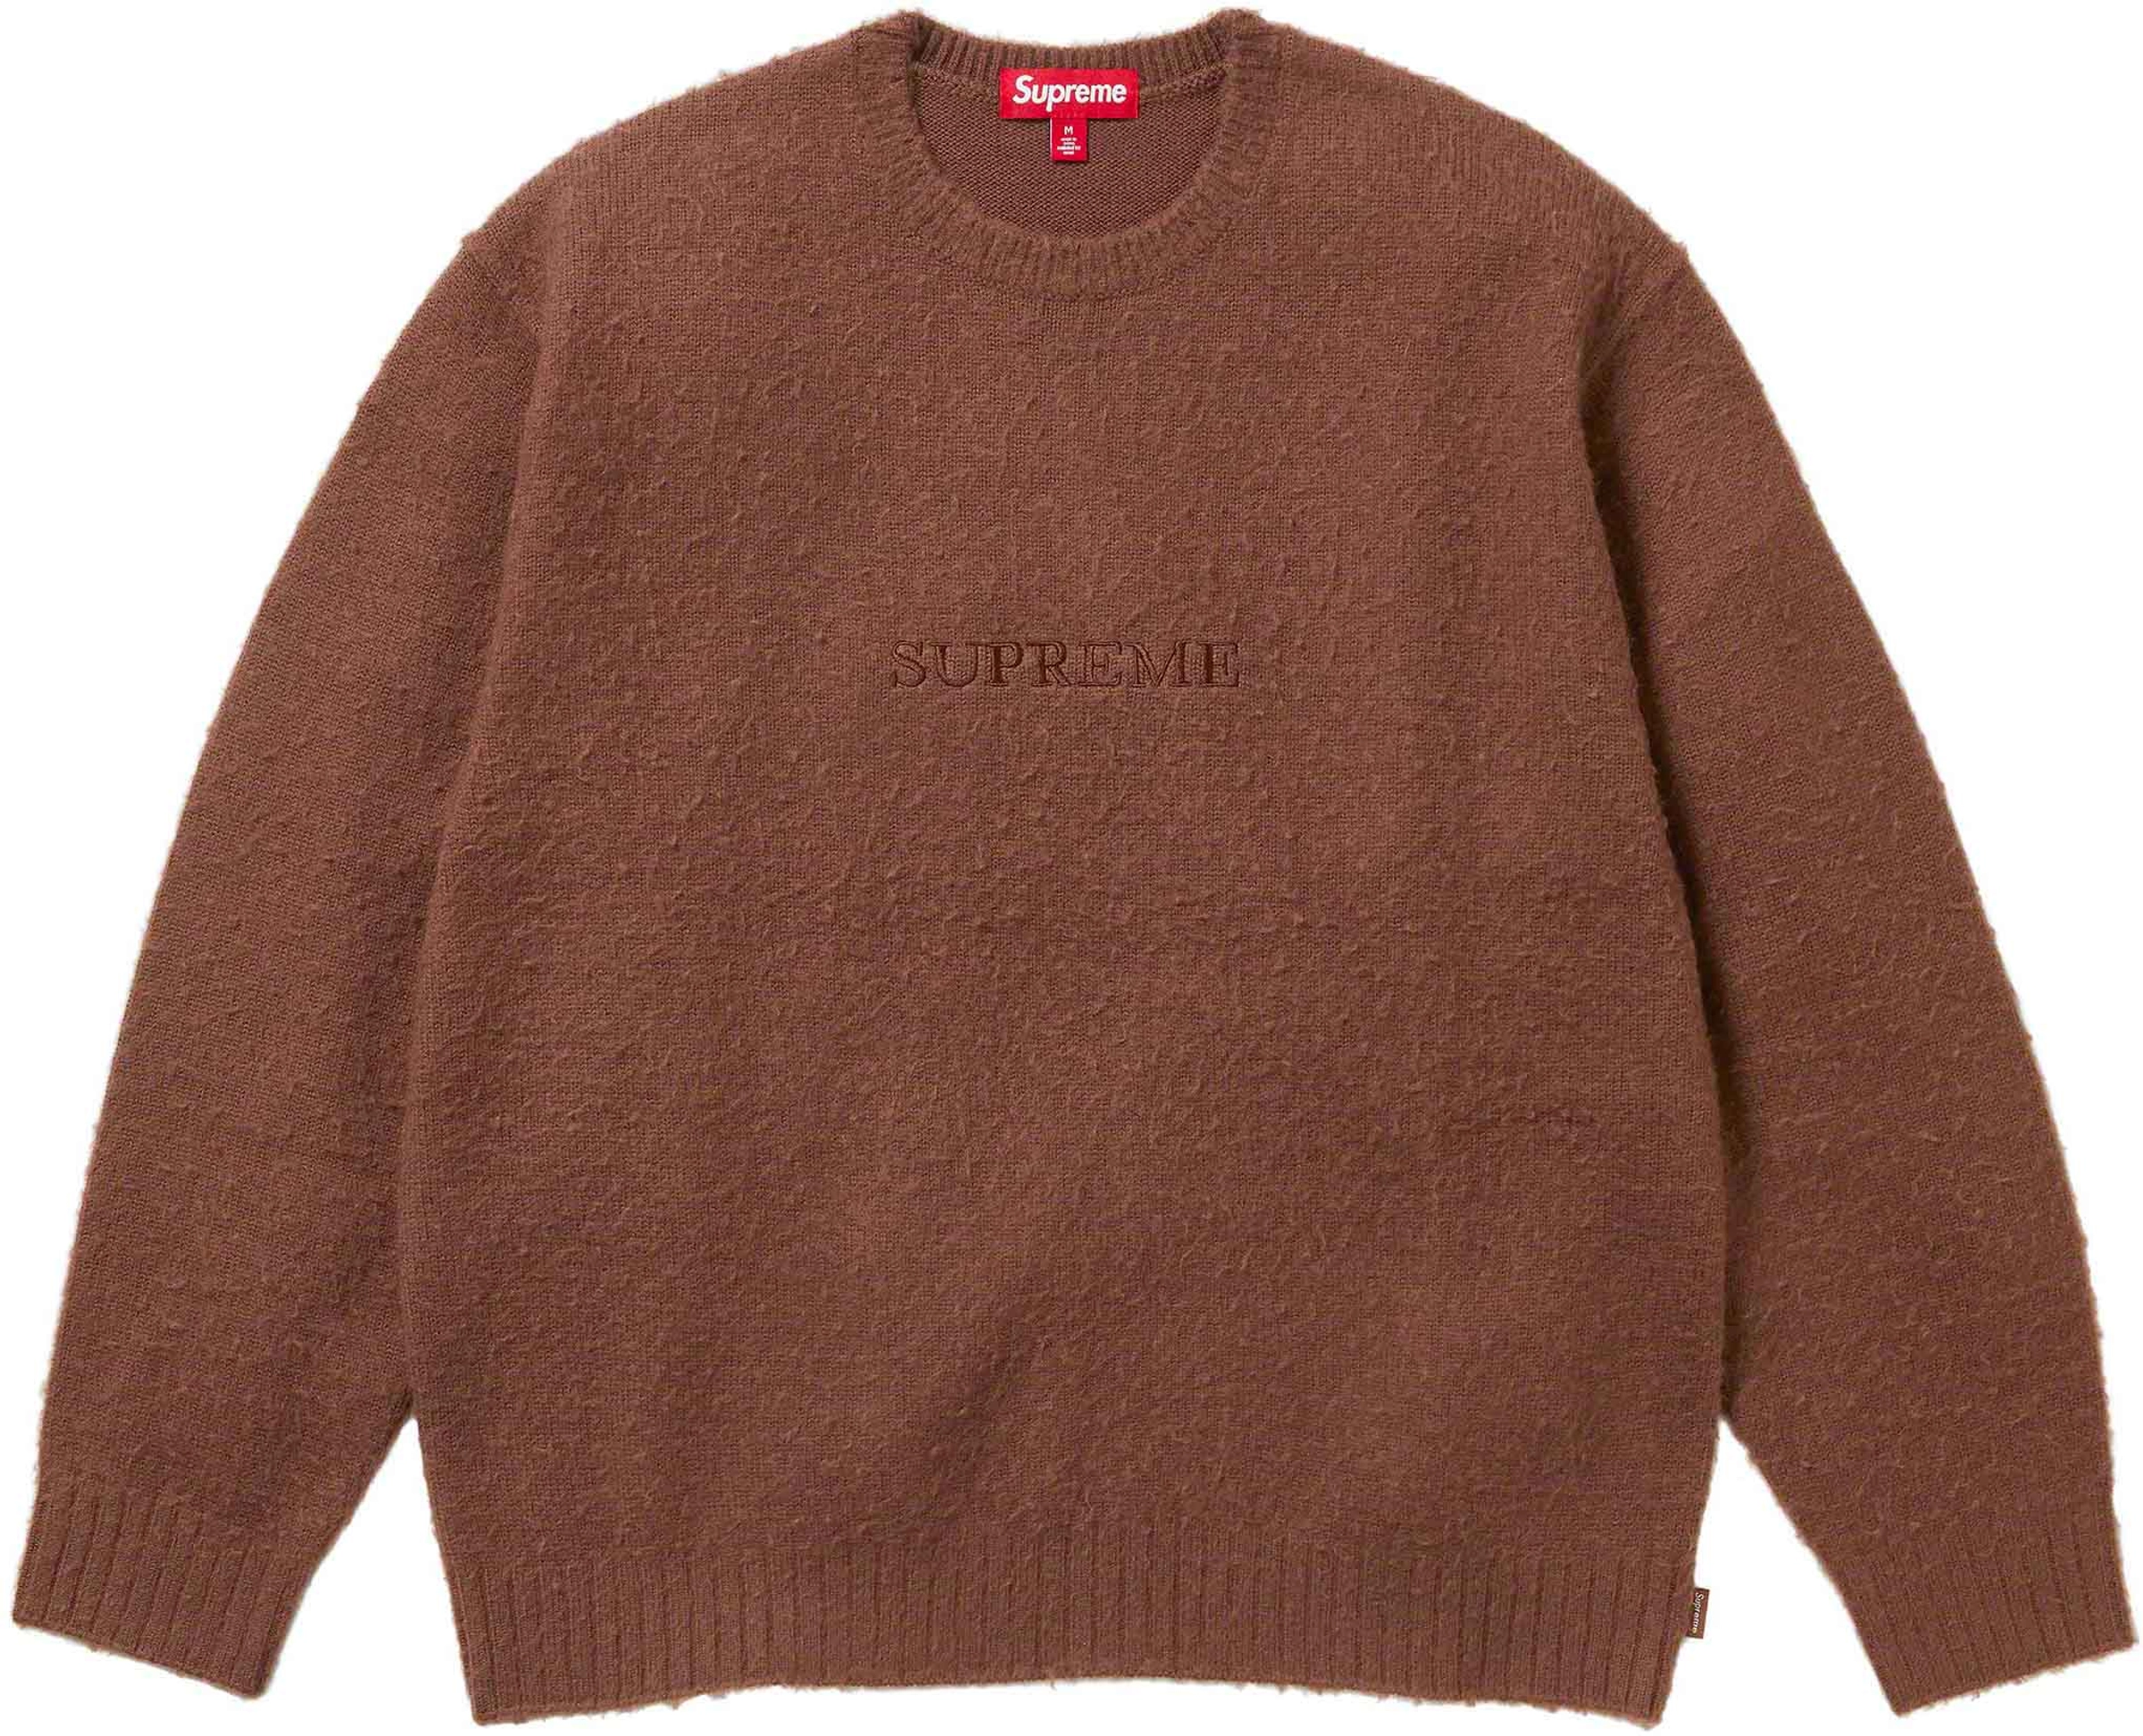 Supreme Pilled Sweater